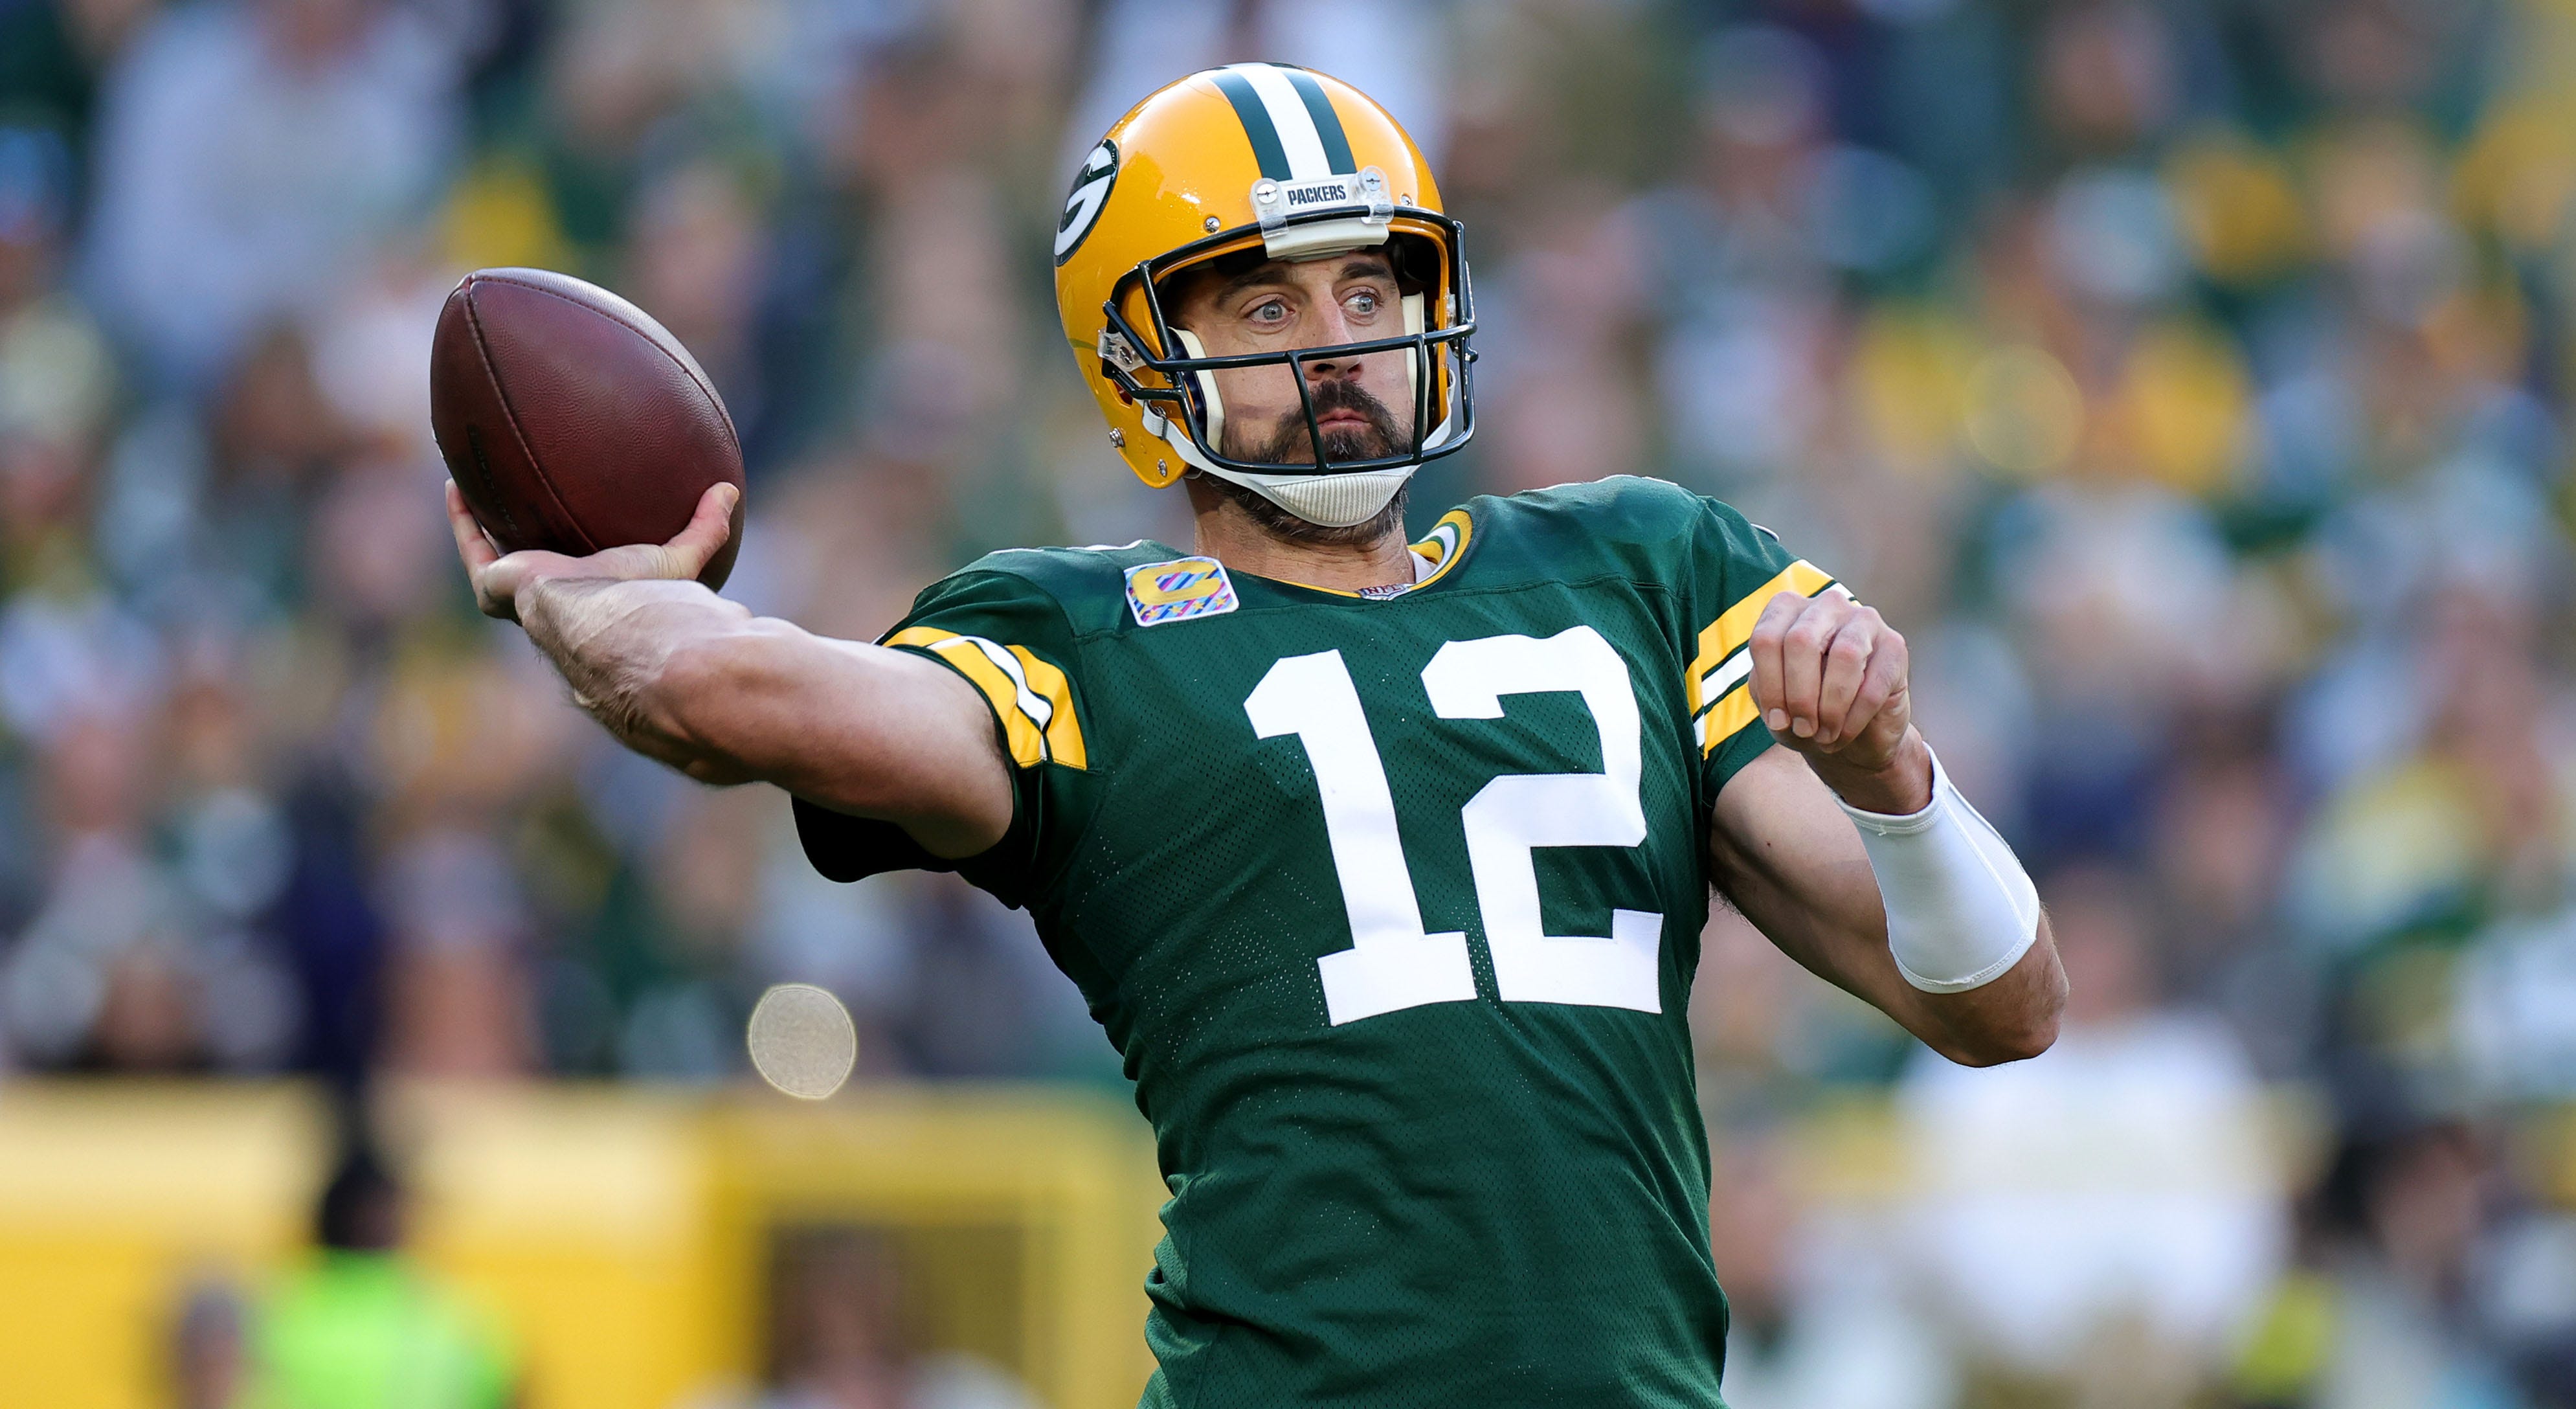 New London's Dillon scores first two NFL TDs as Packers win